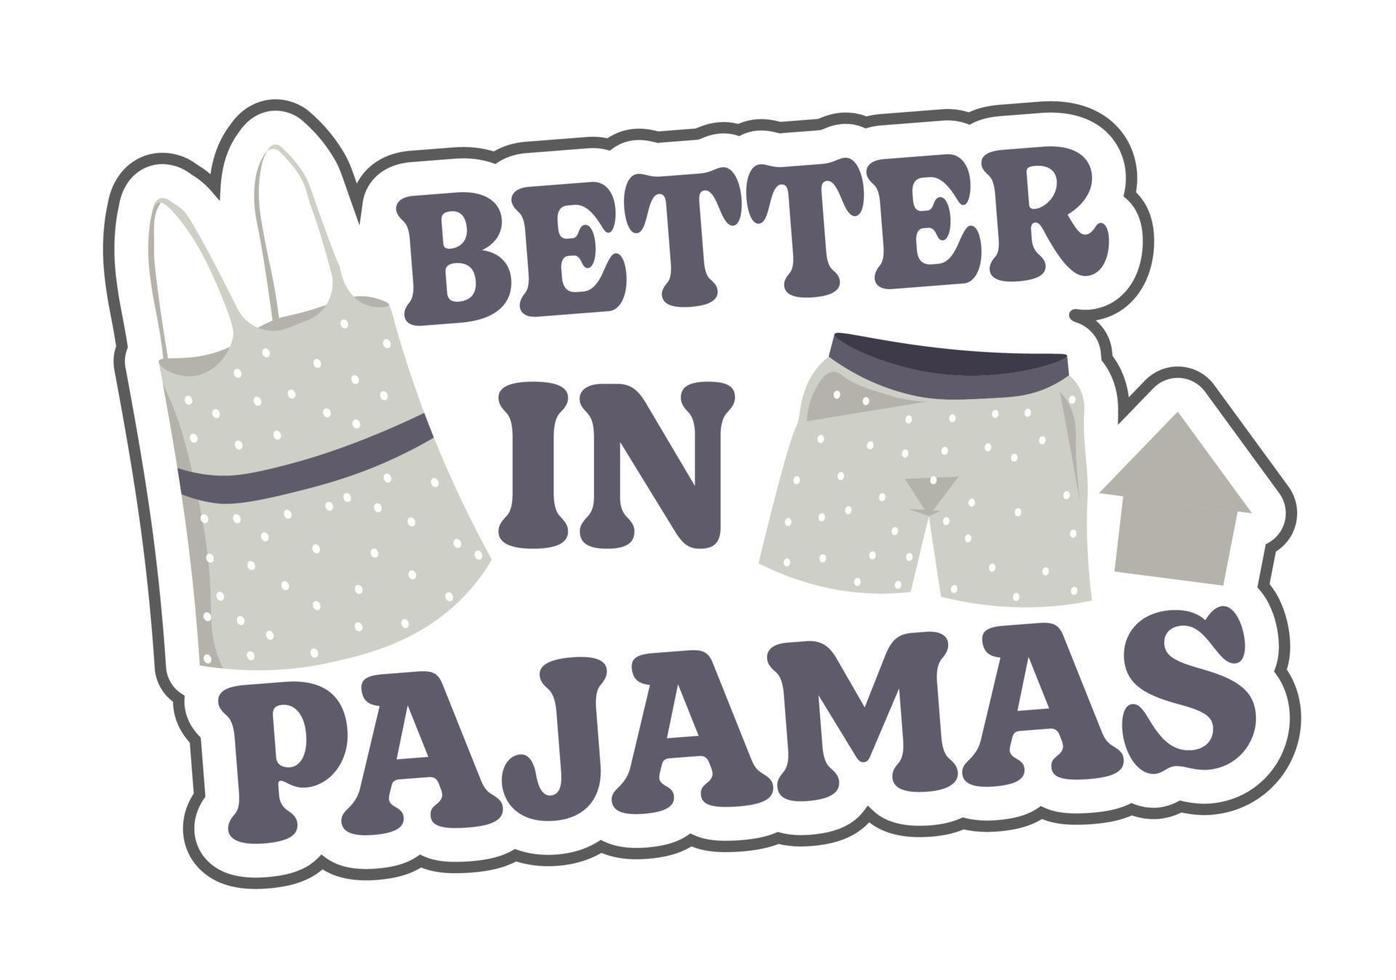 Better in pajamas, comfortable home clothes vector